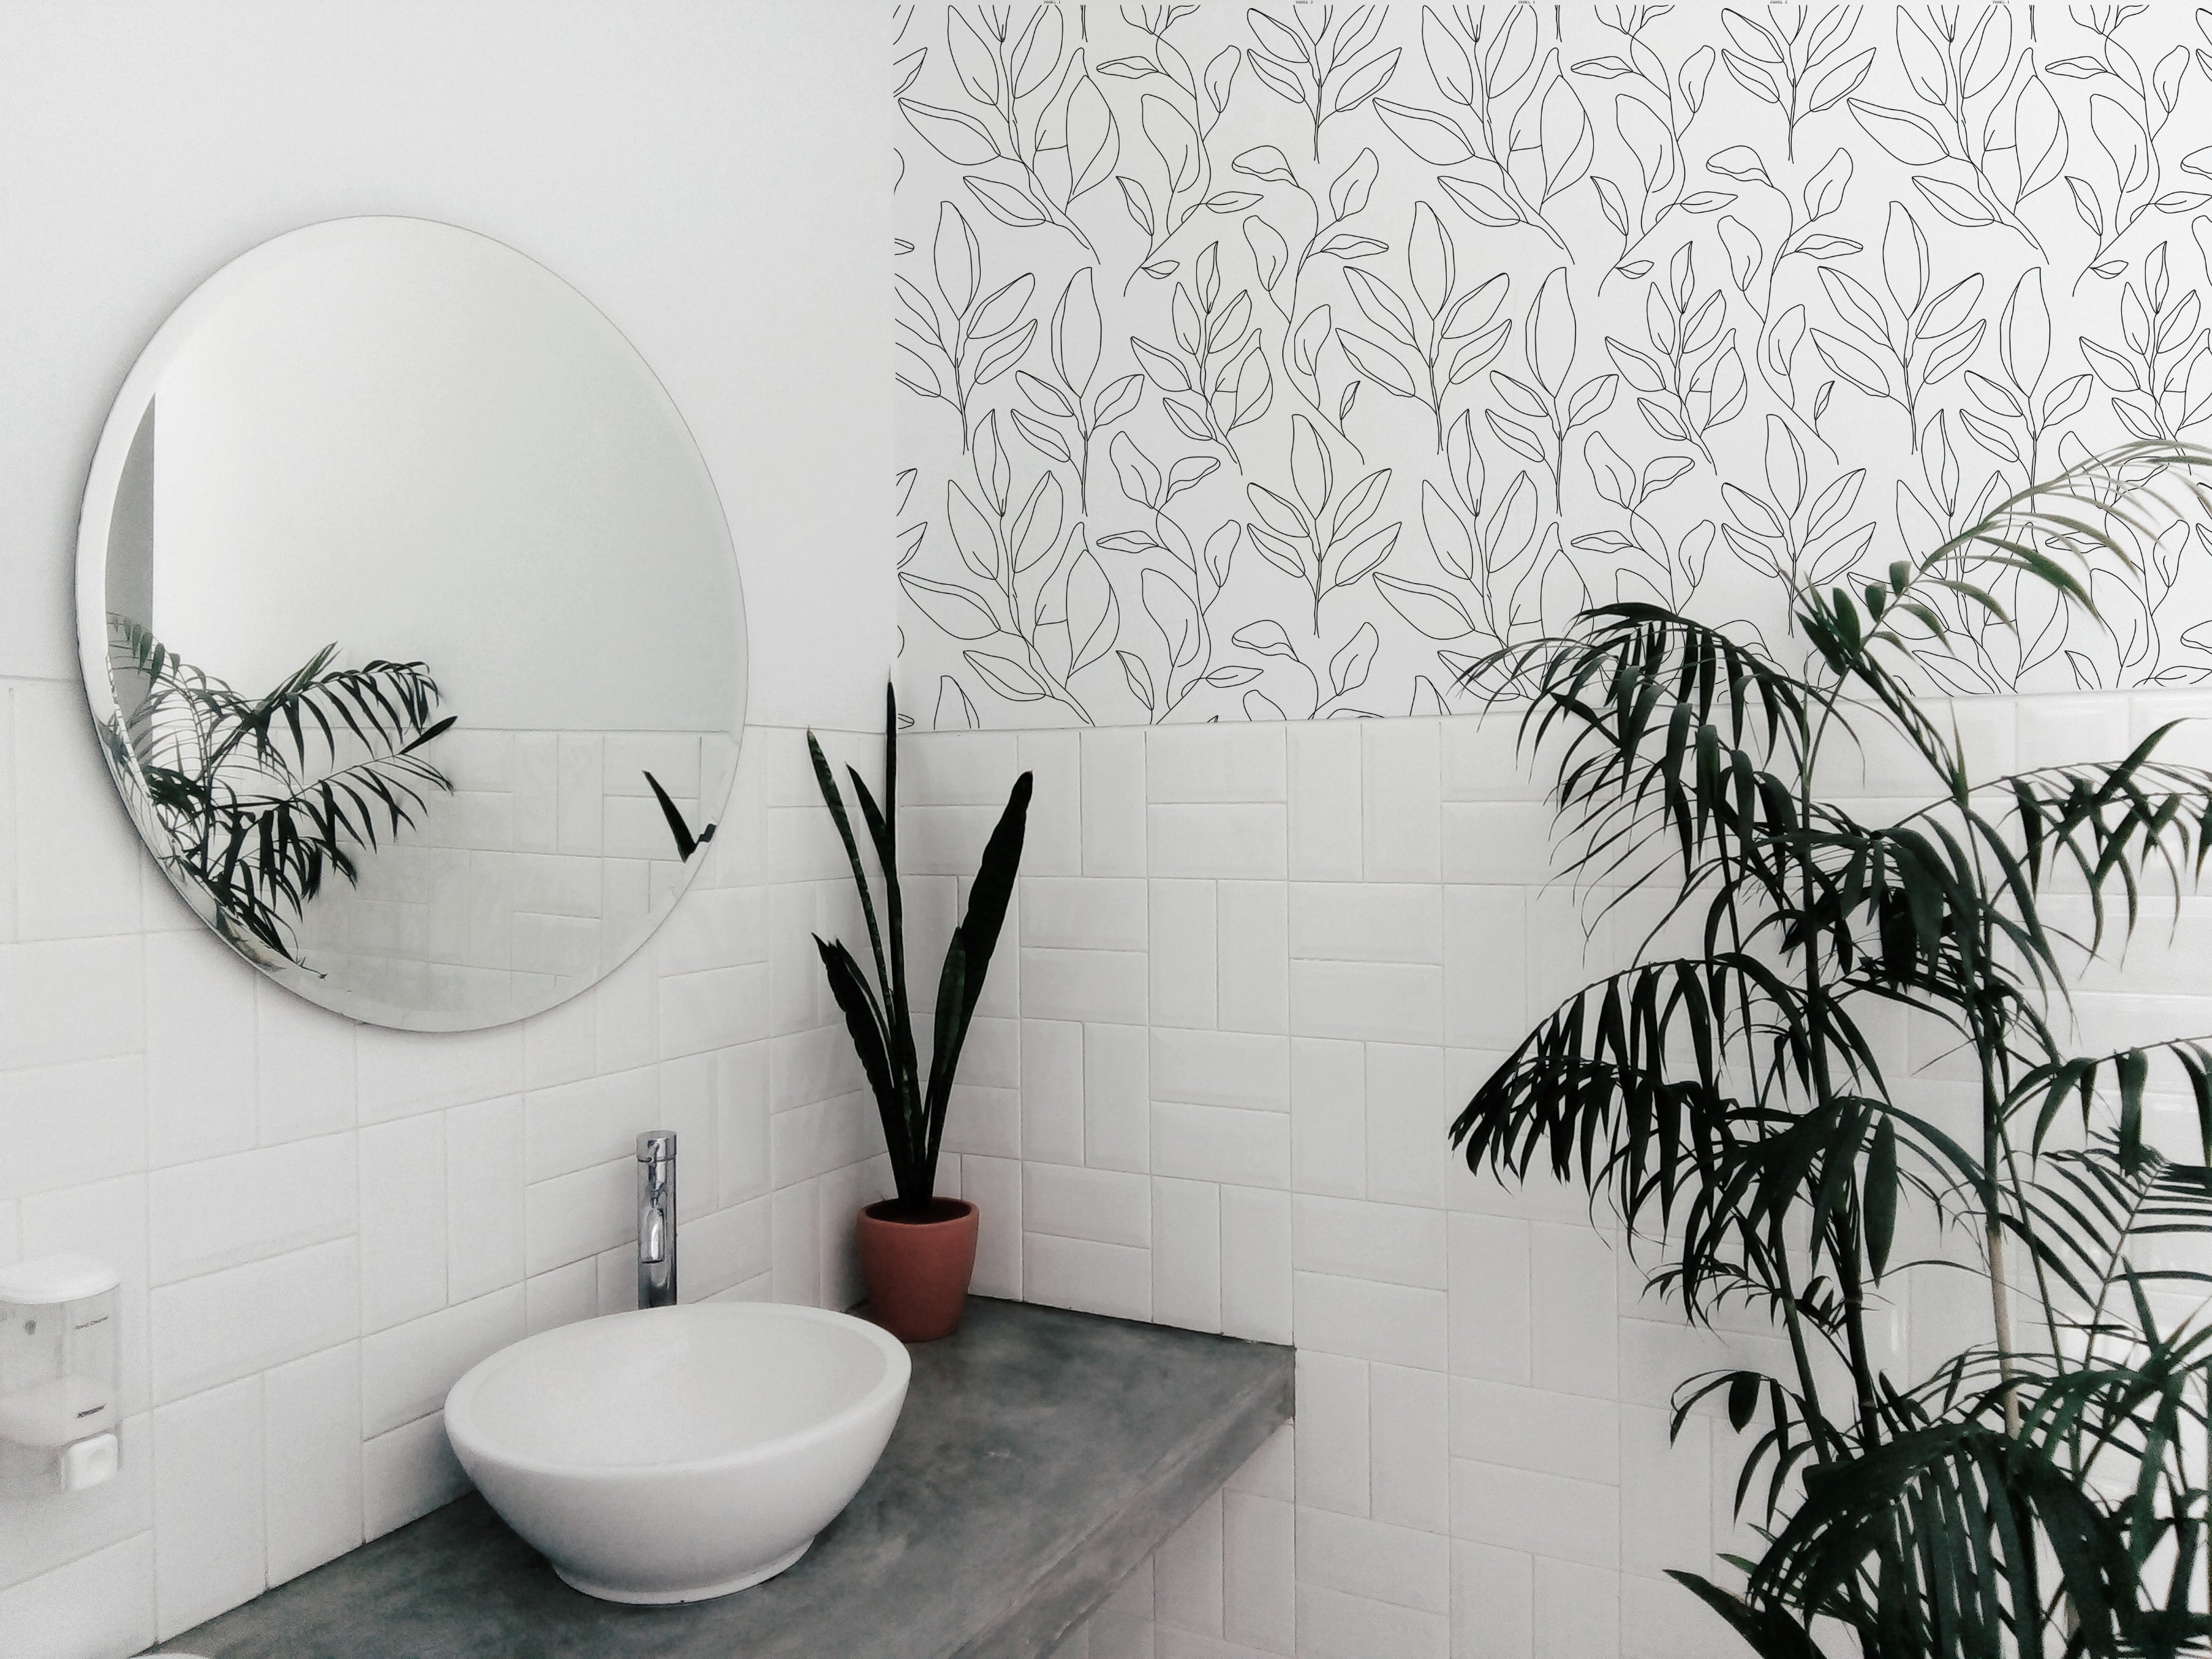 A contemporary bathroom featuring a round mirror, white sink, and green plants. The upper part of the wall is decorated with Black Floral Wallpaper, featuring a delicate black line art design of leaves on a white background.